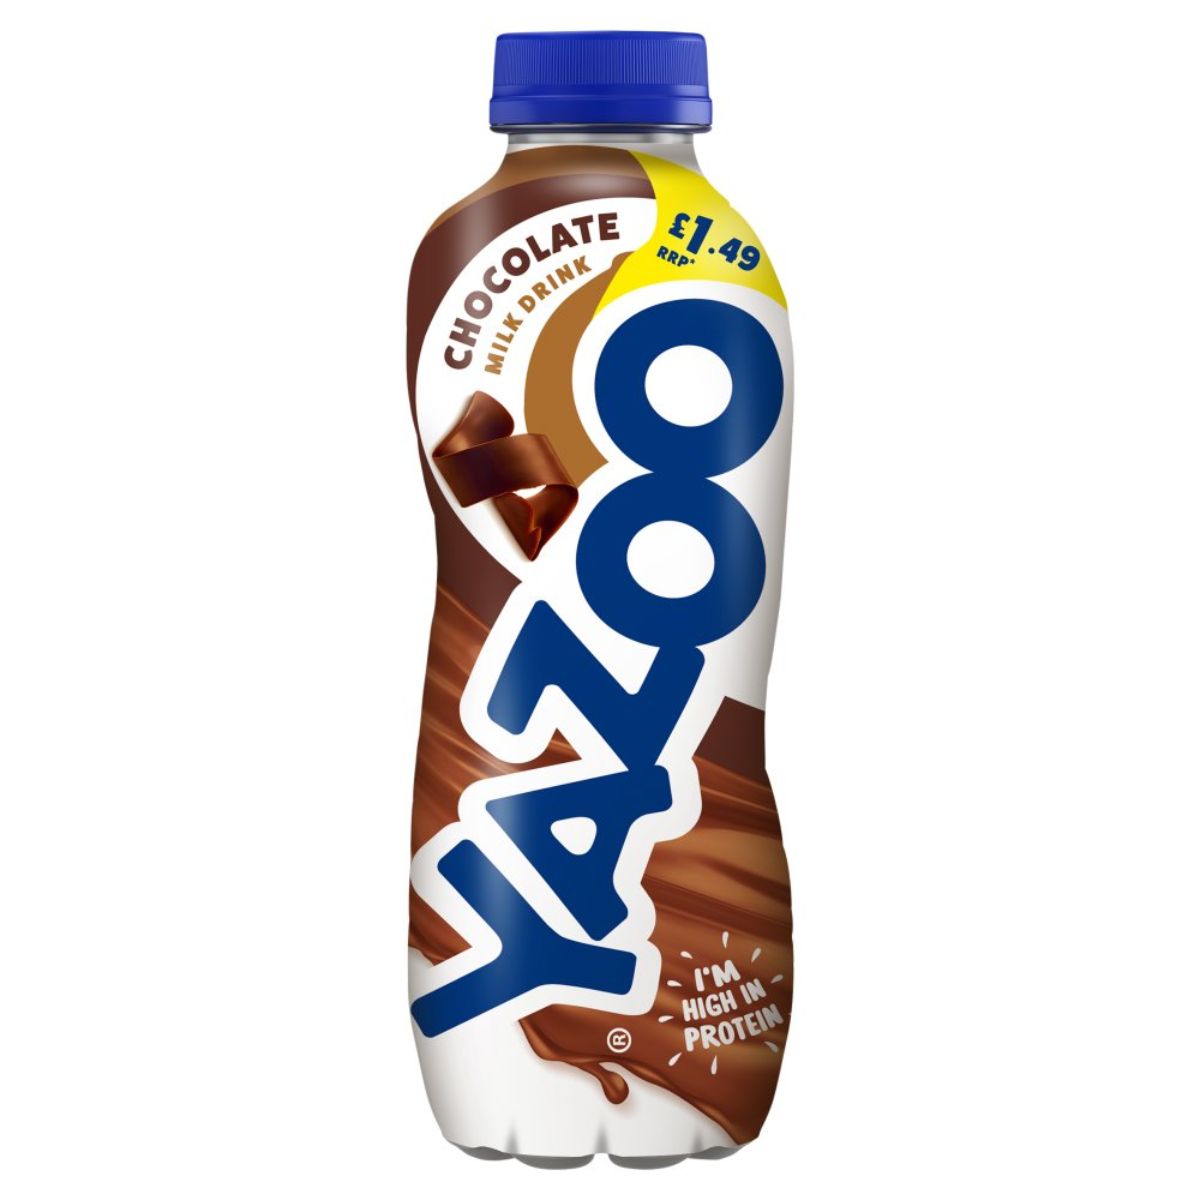 A bottle of Yahoo - Chocolate - 400ml on a white background.